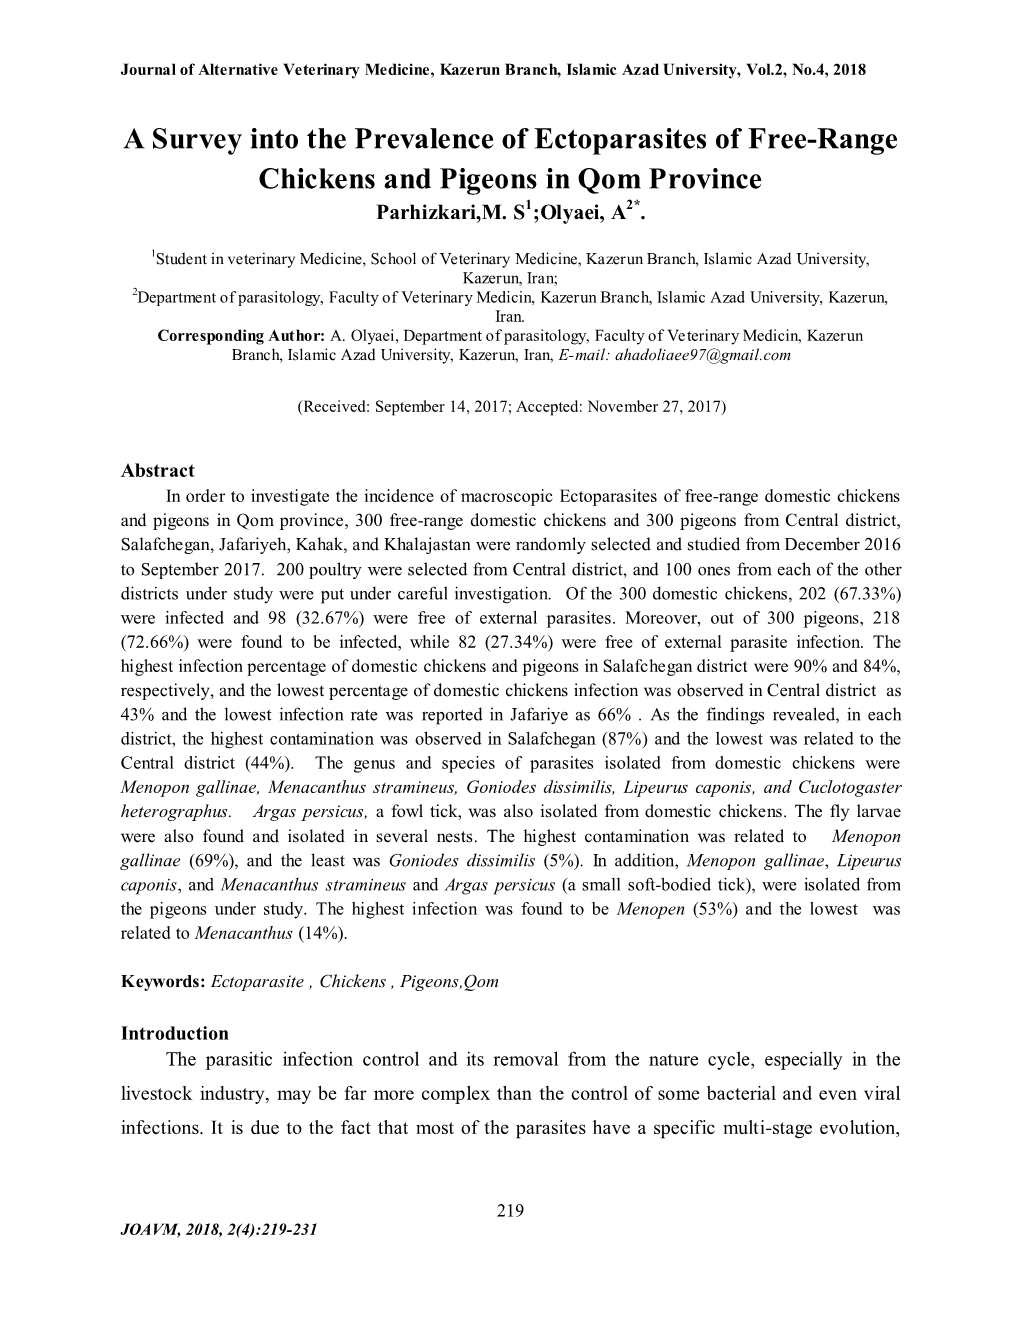 A Survey Into the Prevalence of Ectoparasites of Free-Range Chickens and Pigeons in Qom Province Parhizkari,M